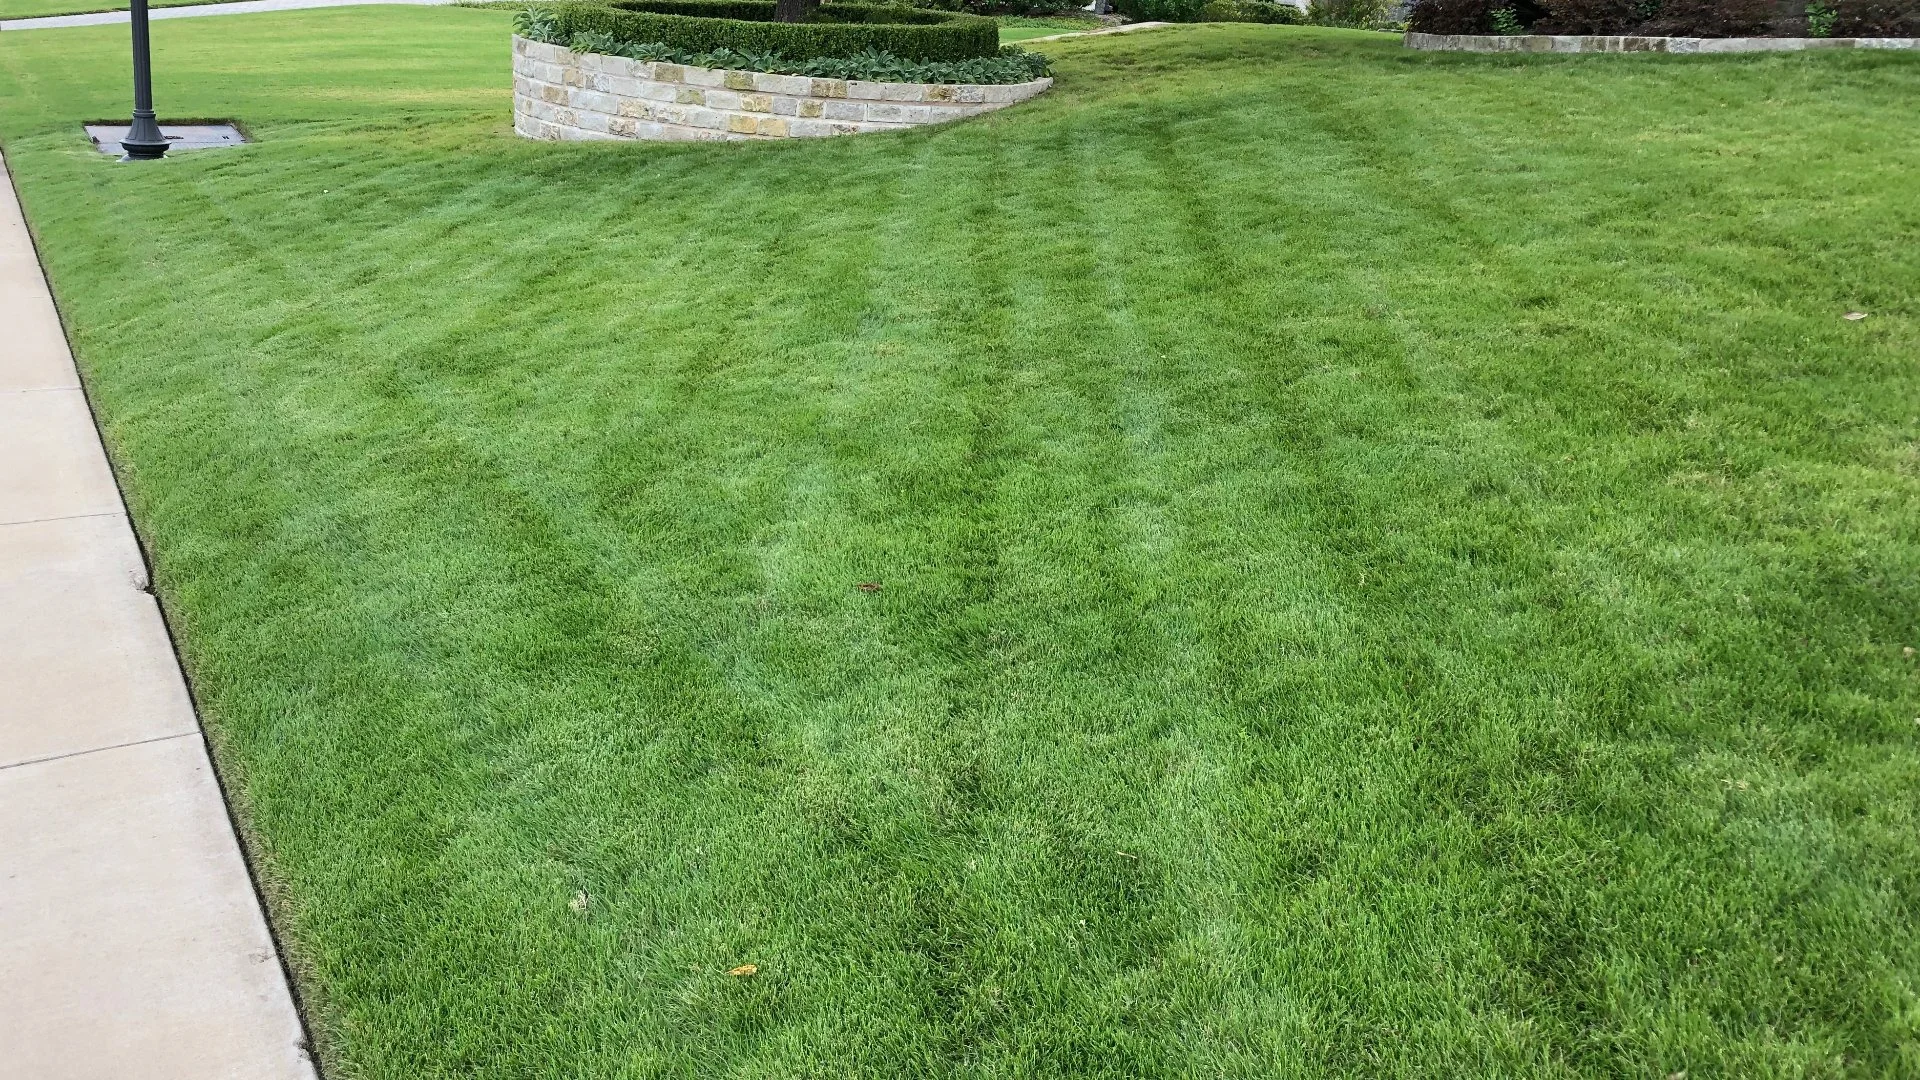 Should I Mow My Lawn Short or Keep It Long?